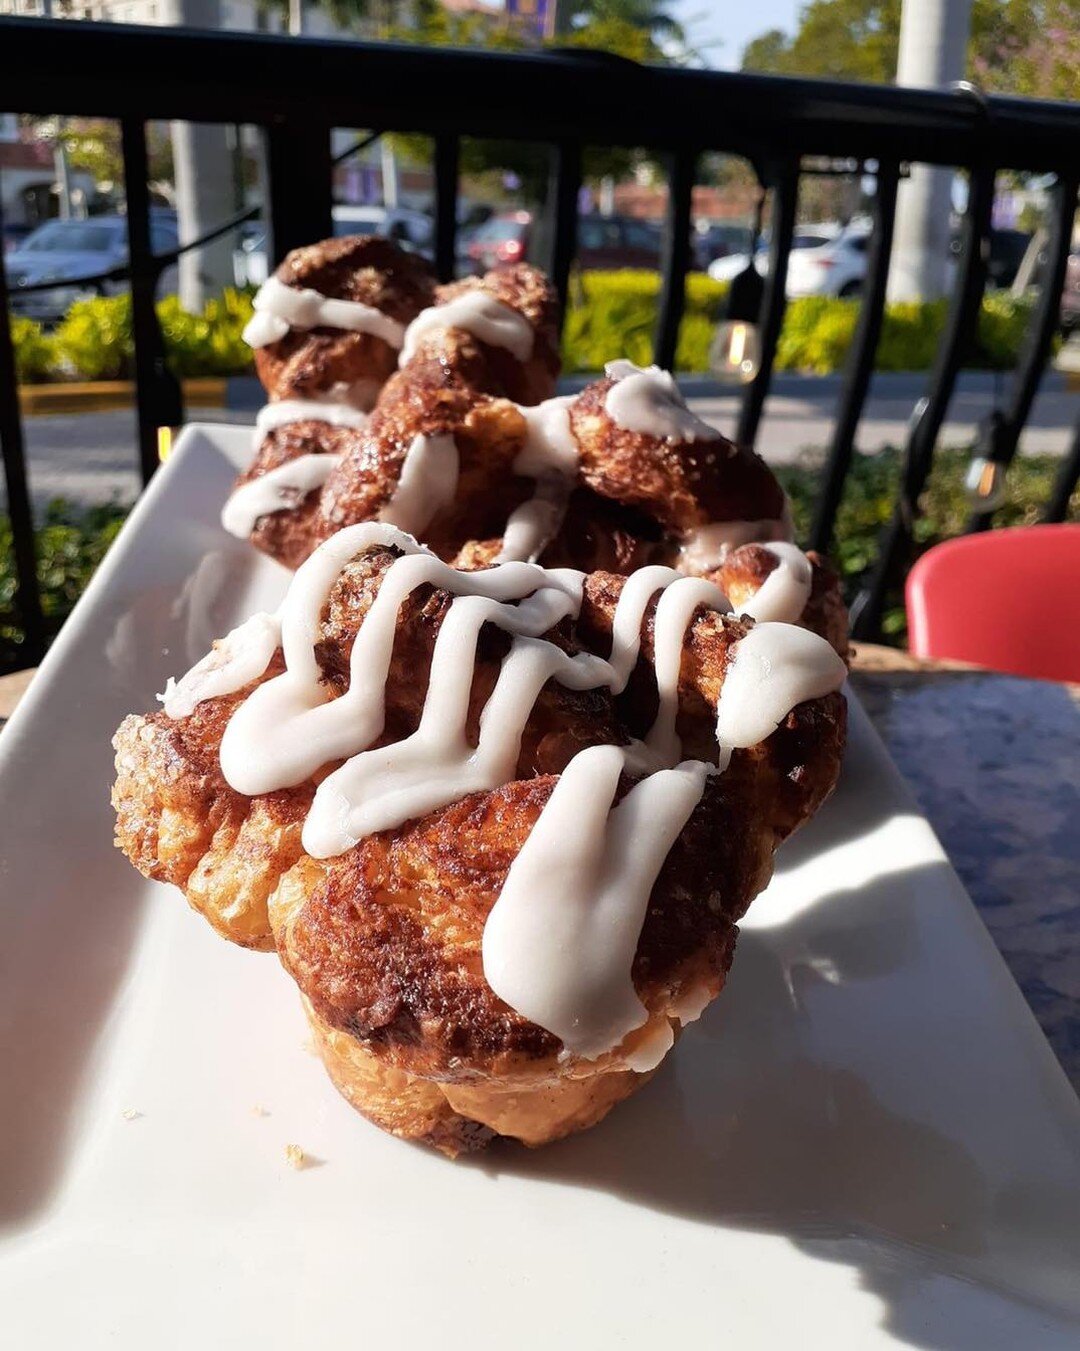 It&rsquo;s #nationalmuffinday &mdash; but muffins are a little ho hum ... you should come in and enjoy our Cruffin. A perfectly light and airy crumb, laminated with lots of cinnamon and raw sugar. Topped with a light vanilla frosting perfect with our